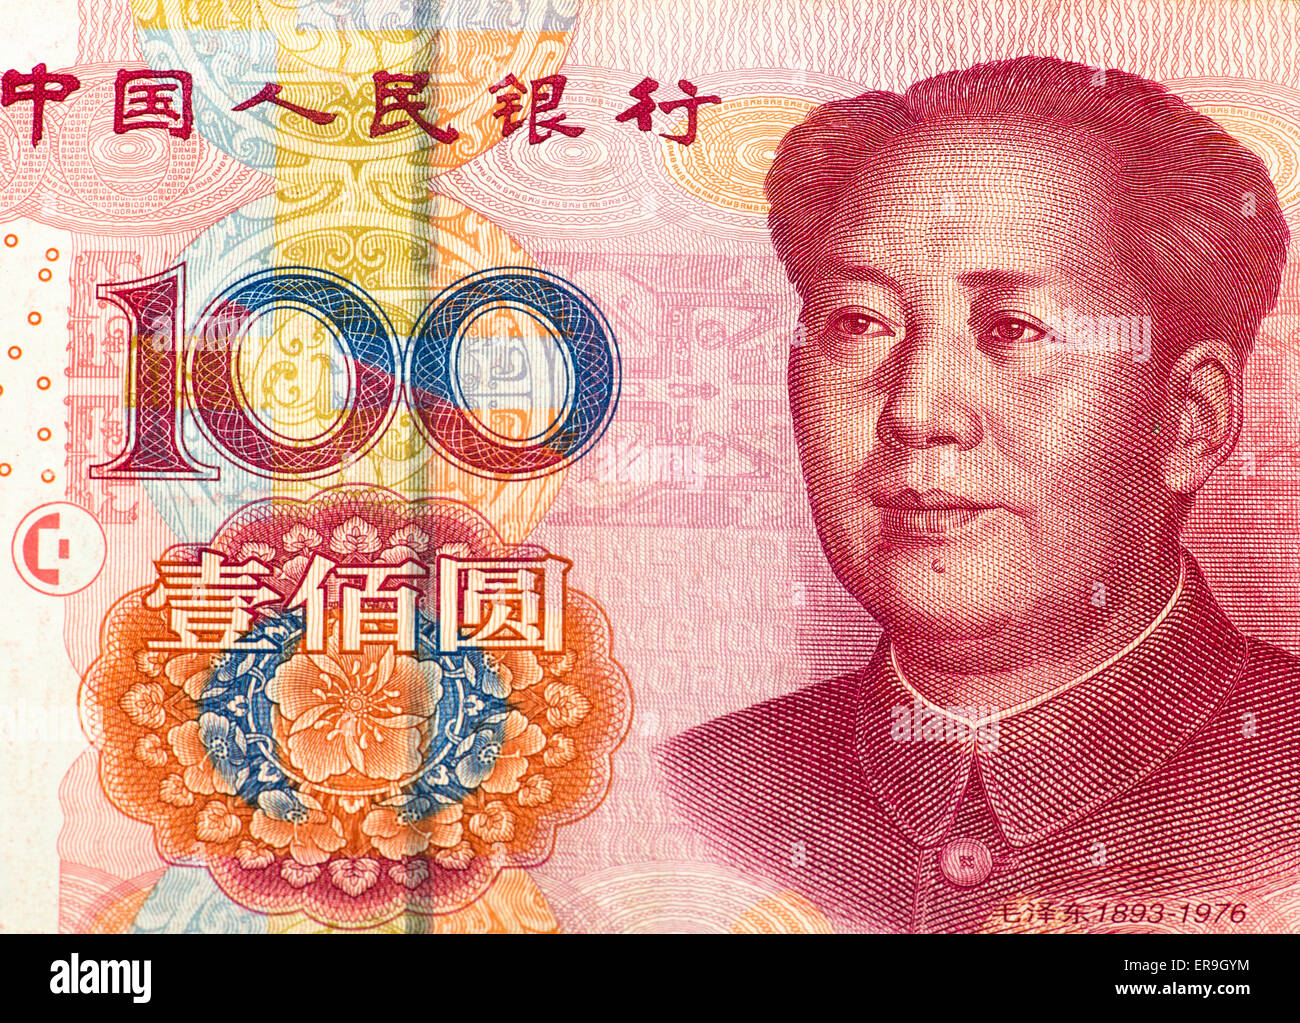 Chinese banknotes Stock Photo